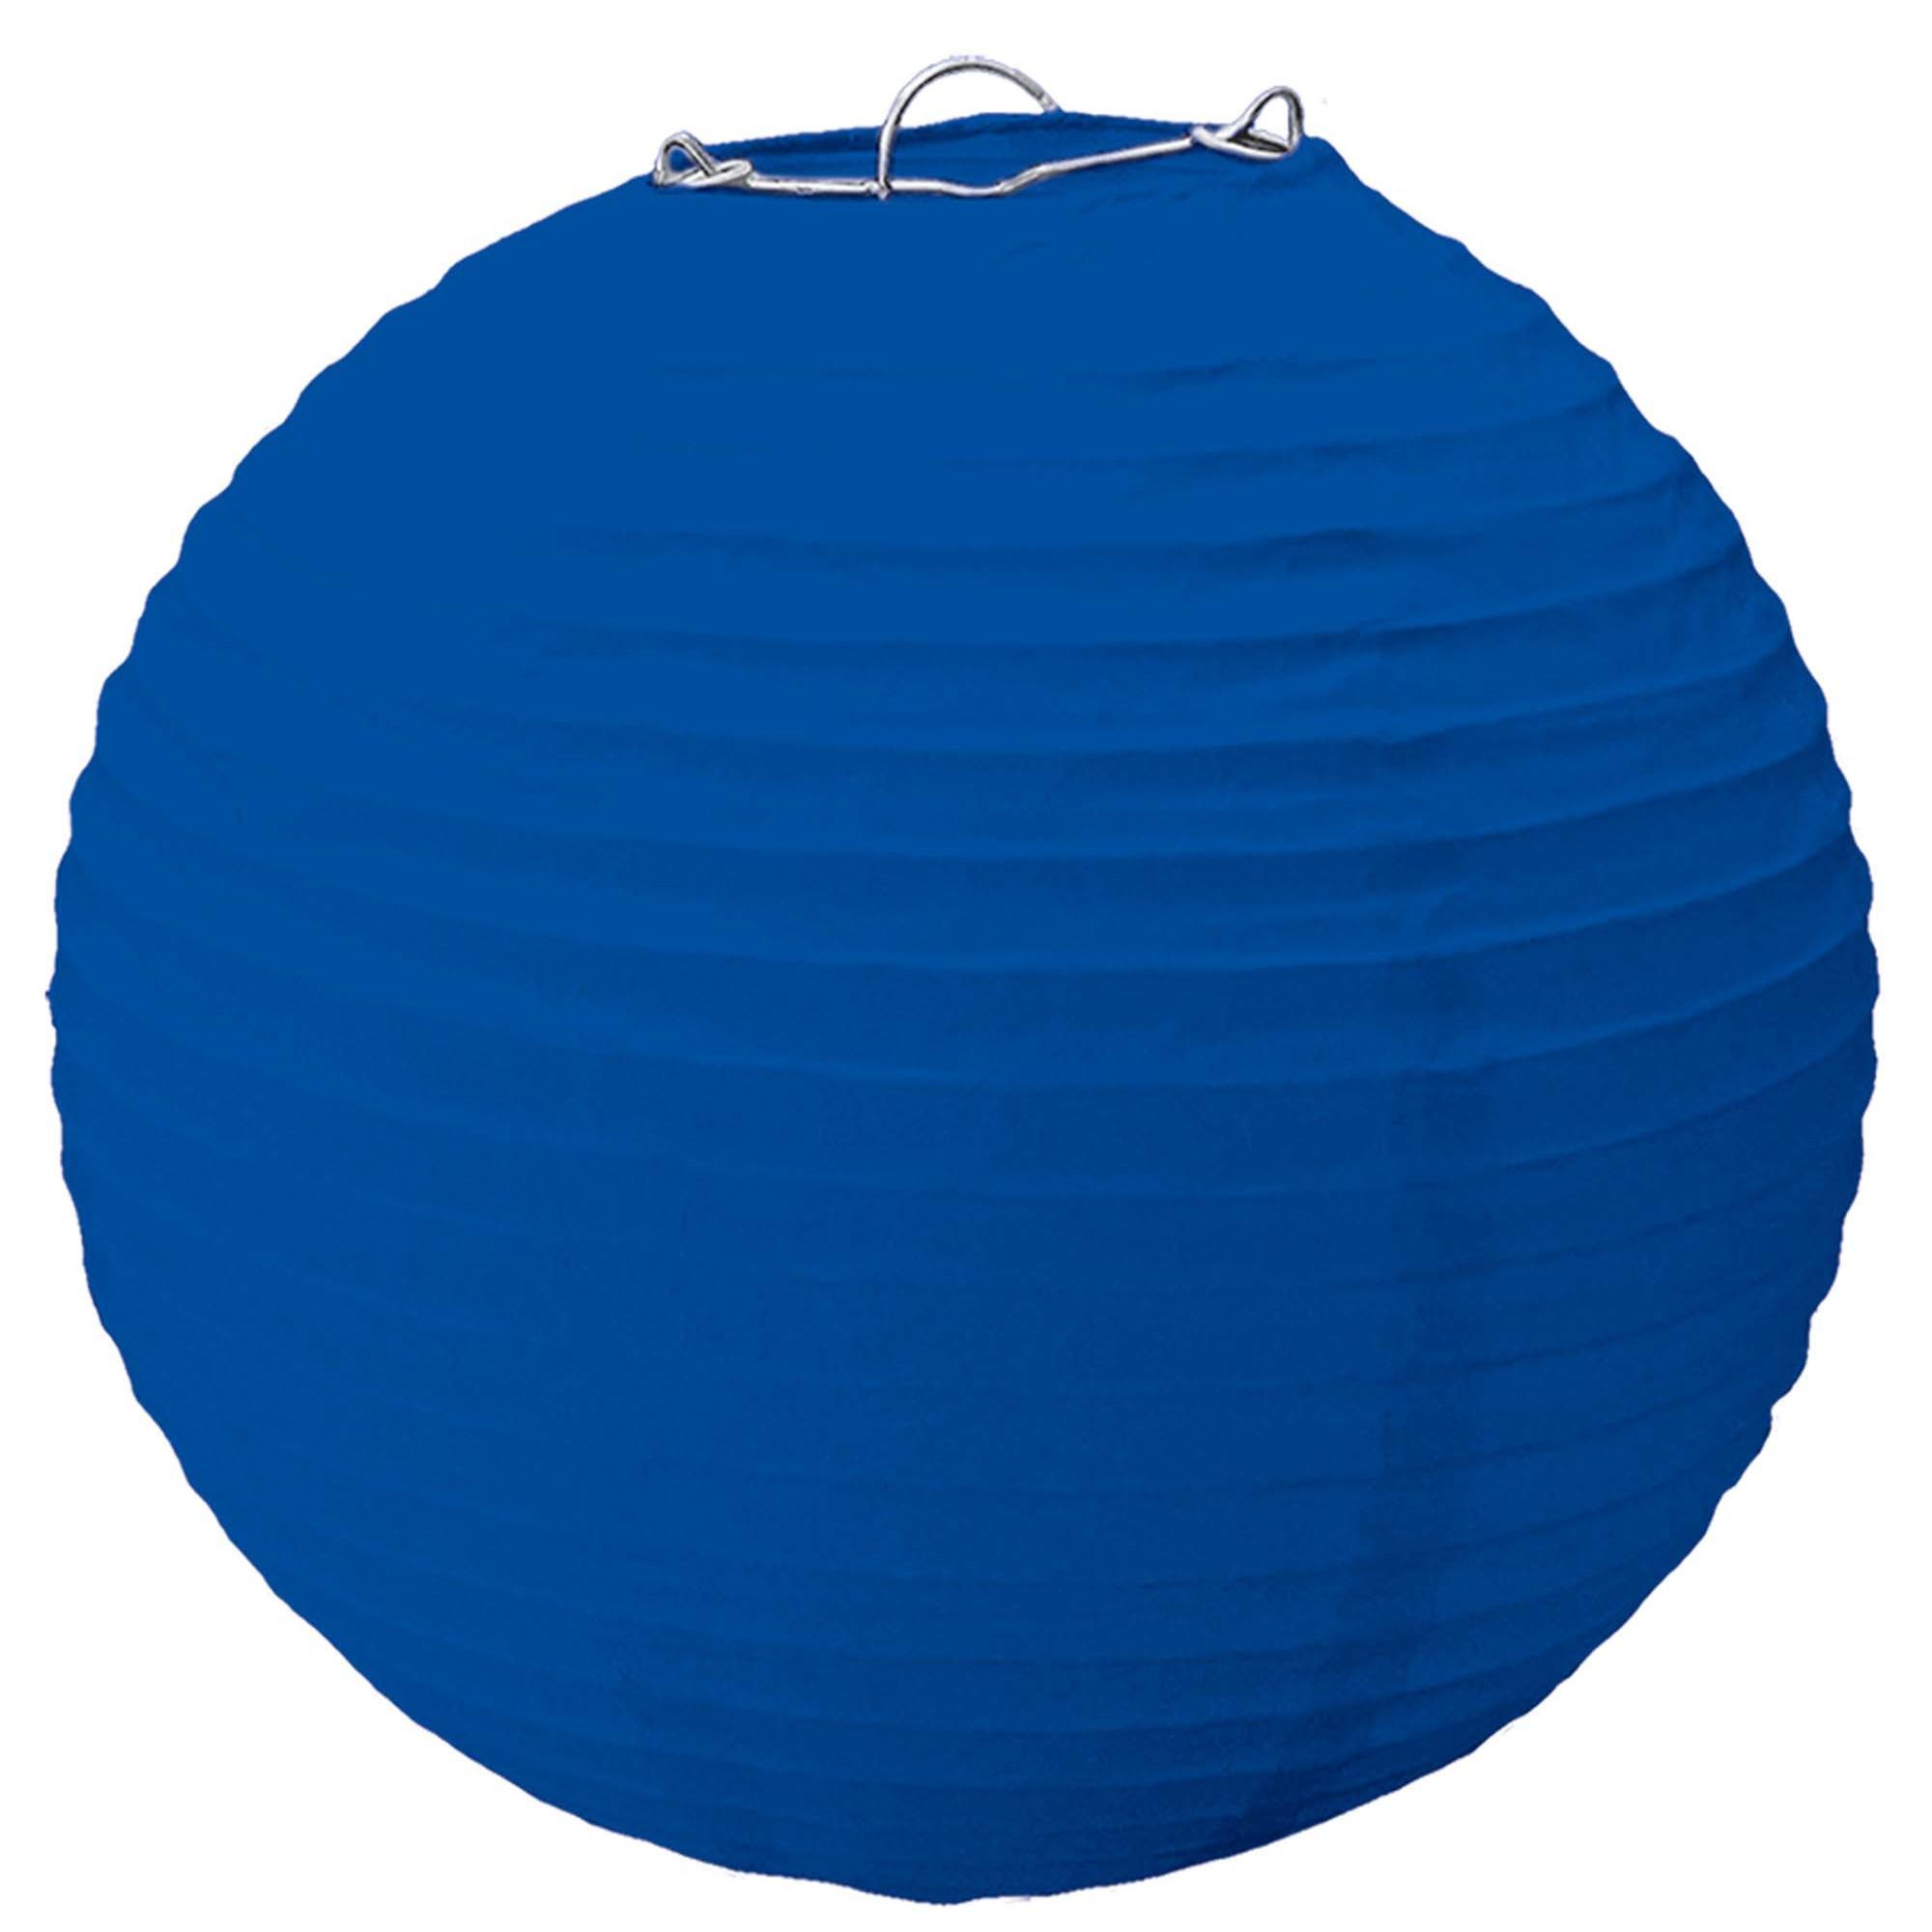 Bright Royal Blue Paper Lantern With Metal Frame 15.50in